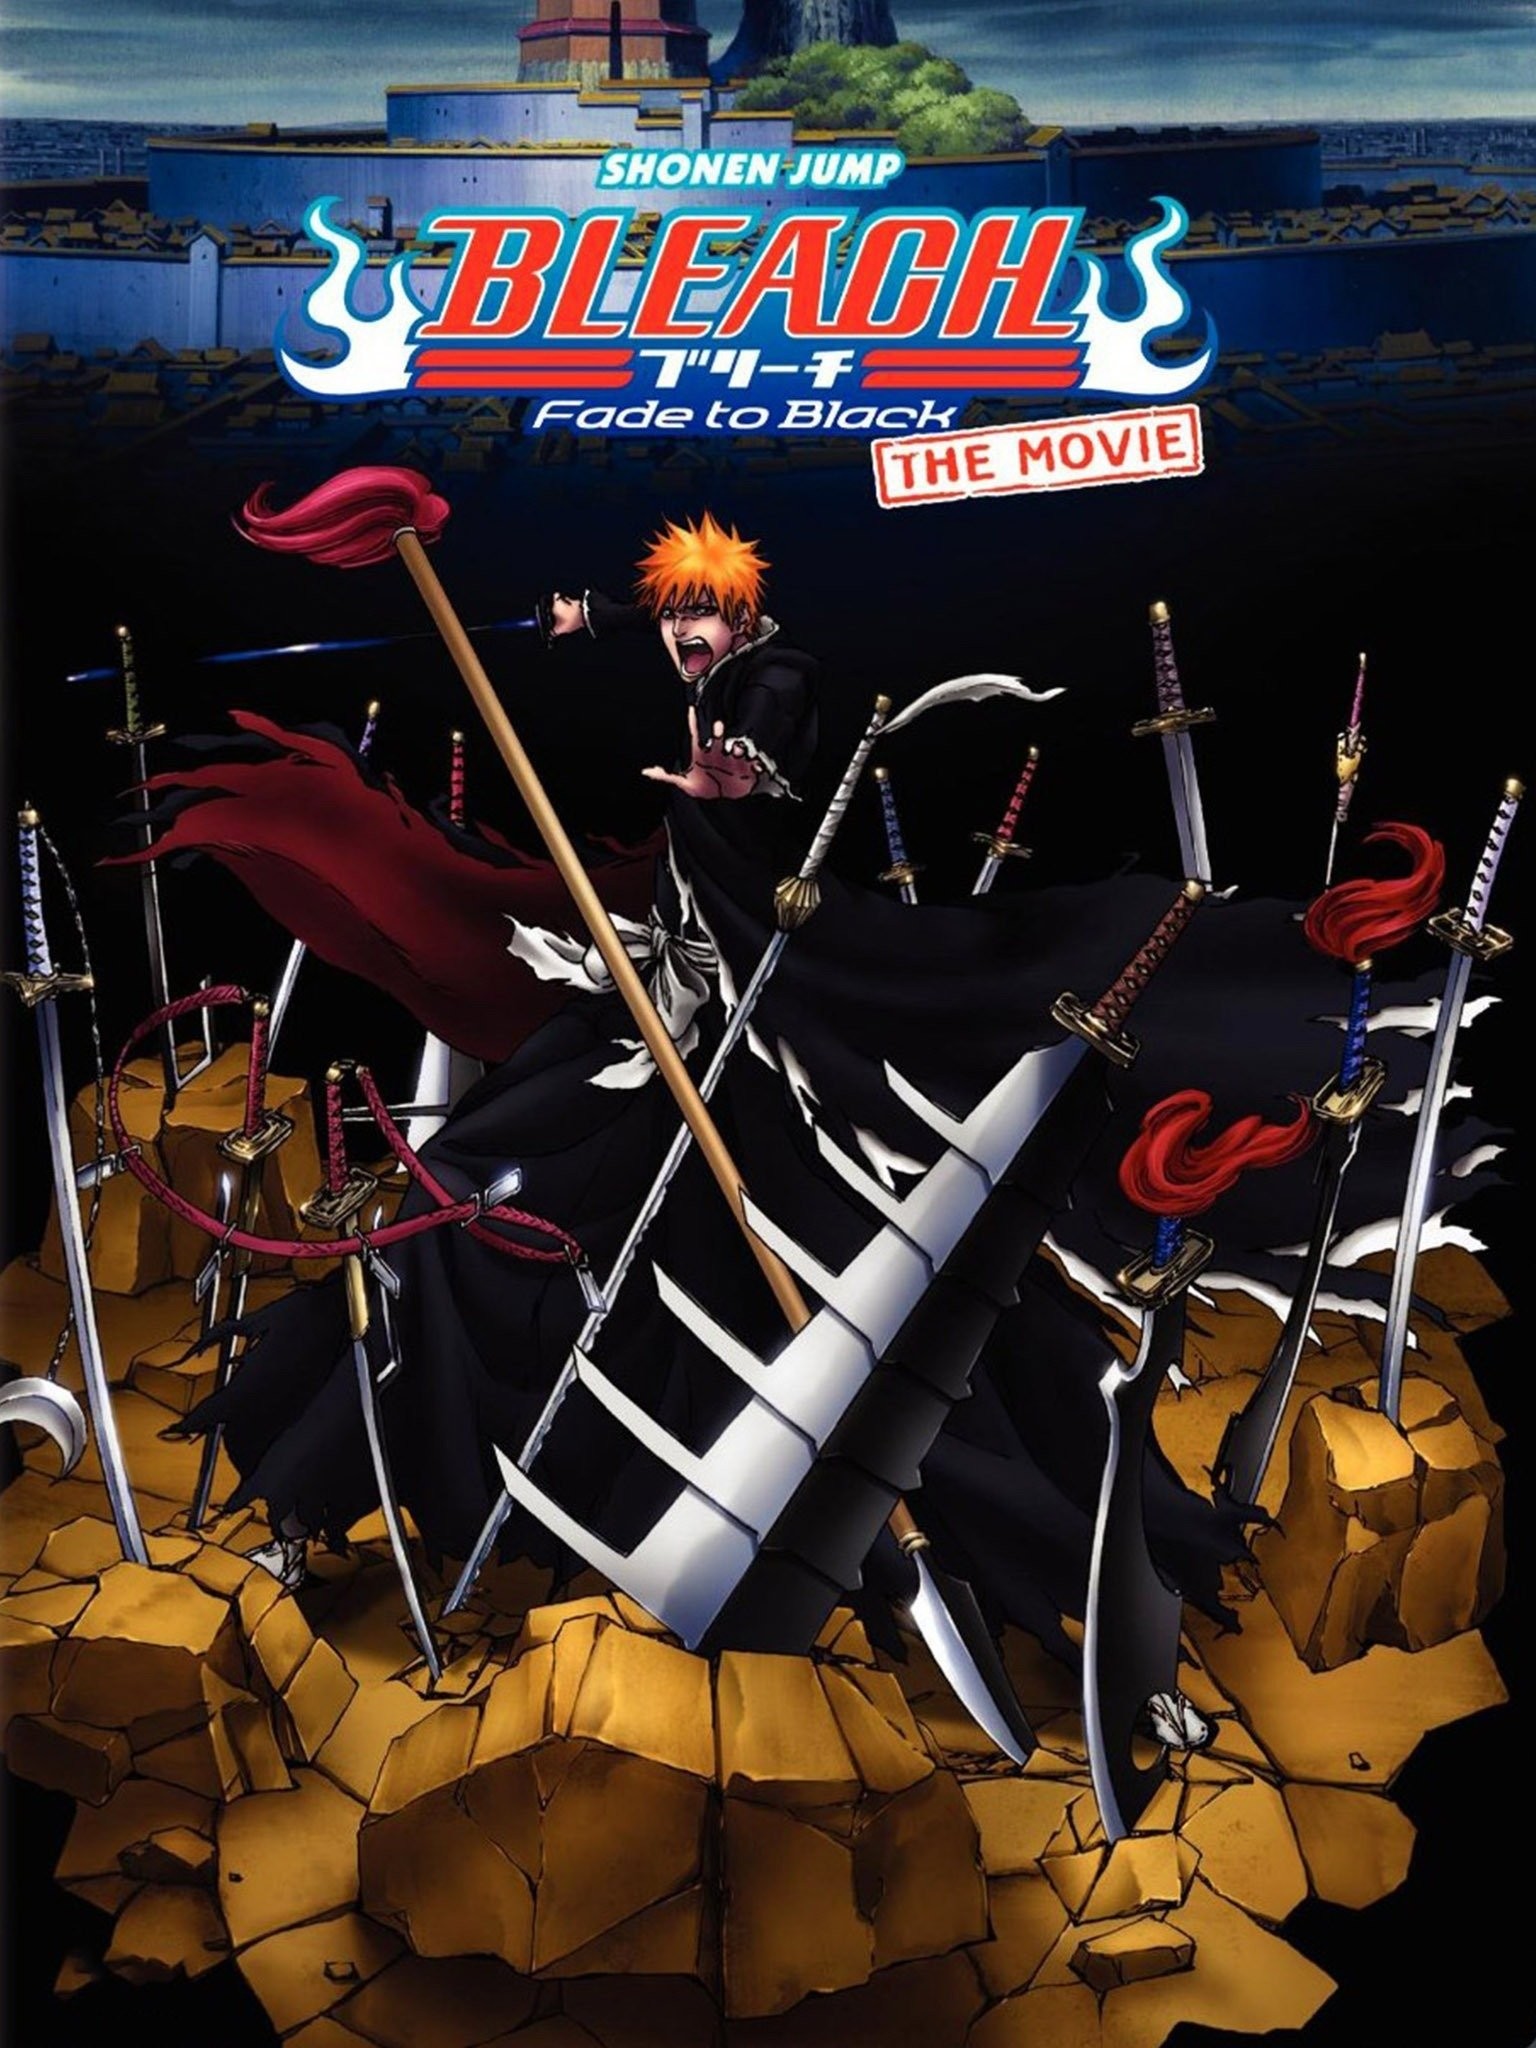 Bleach Episodes 1 - 63 English Dubbed Seasons 1 - 3 on 6 DVDs